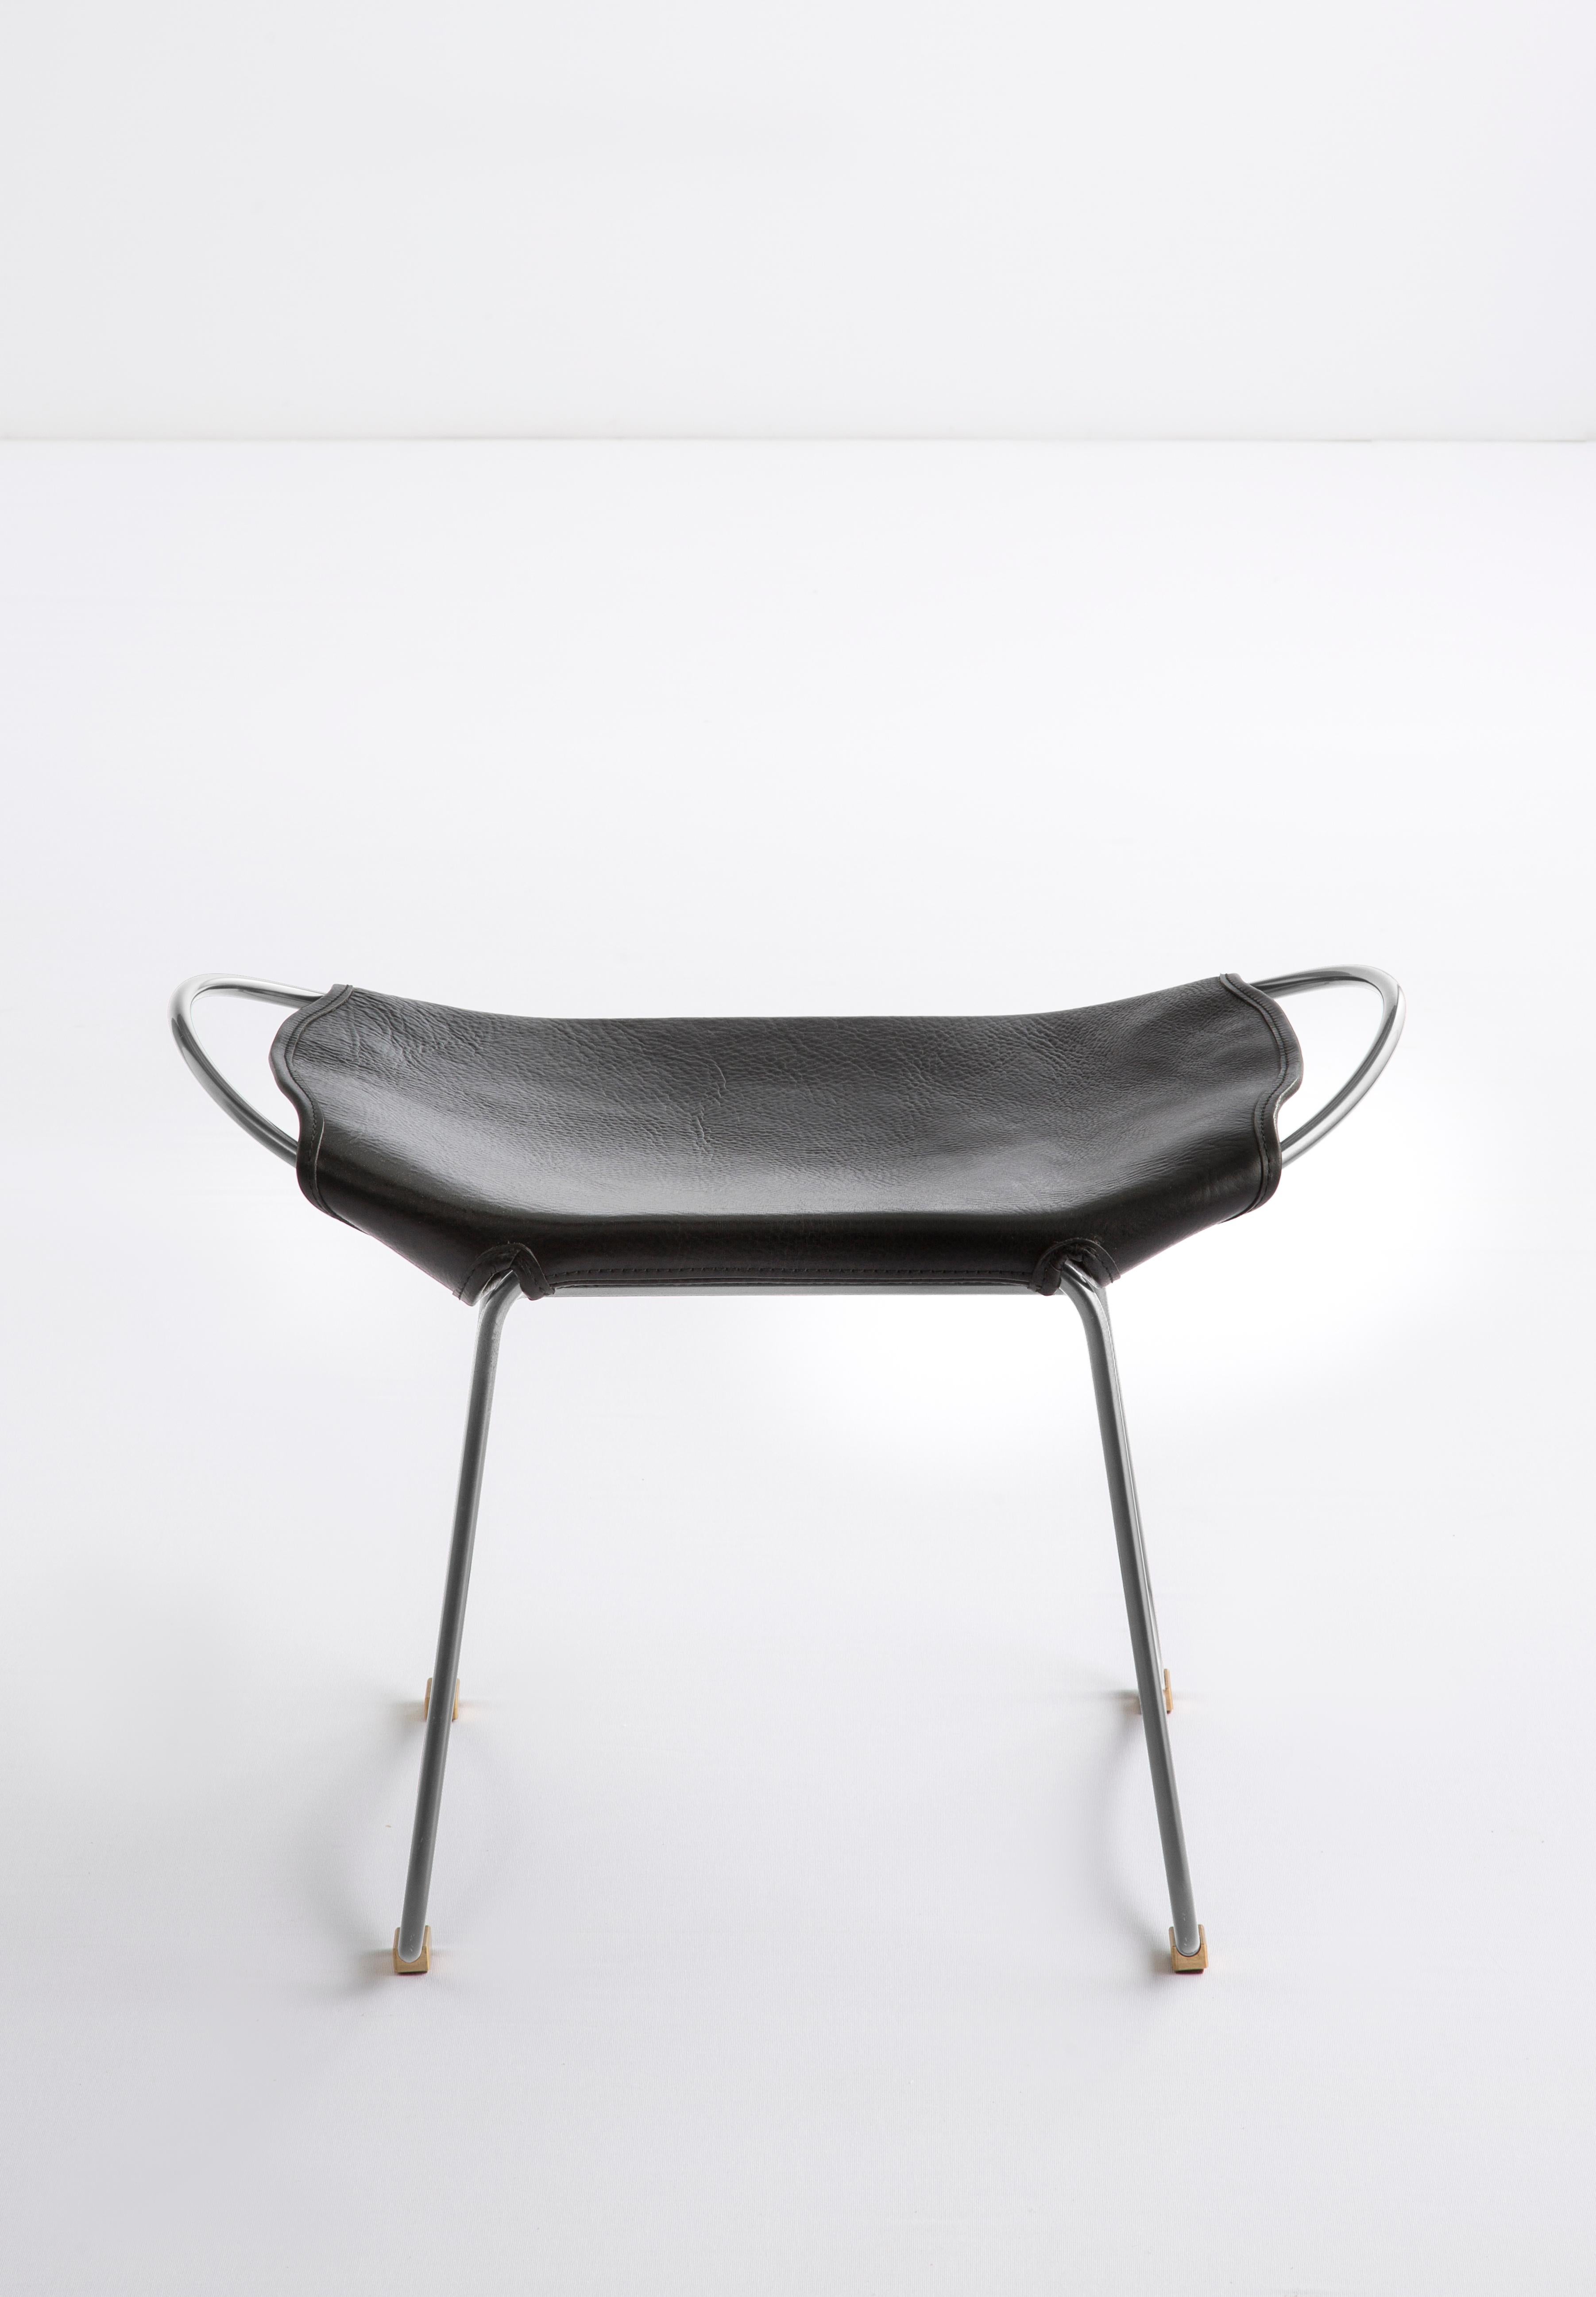 Spanish Footstool Silver Steel and Black Saddle Leather, Modern Style, Hug Collection For Sale